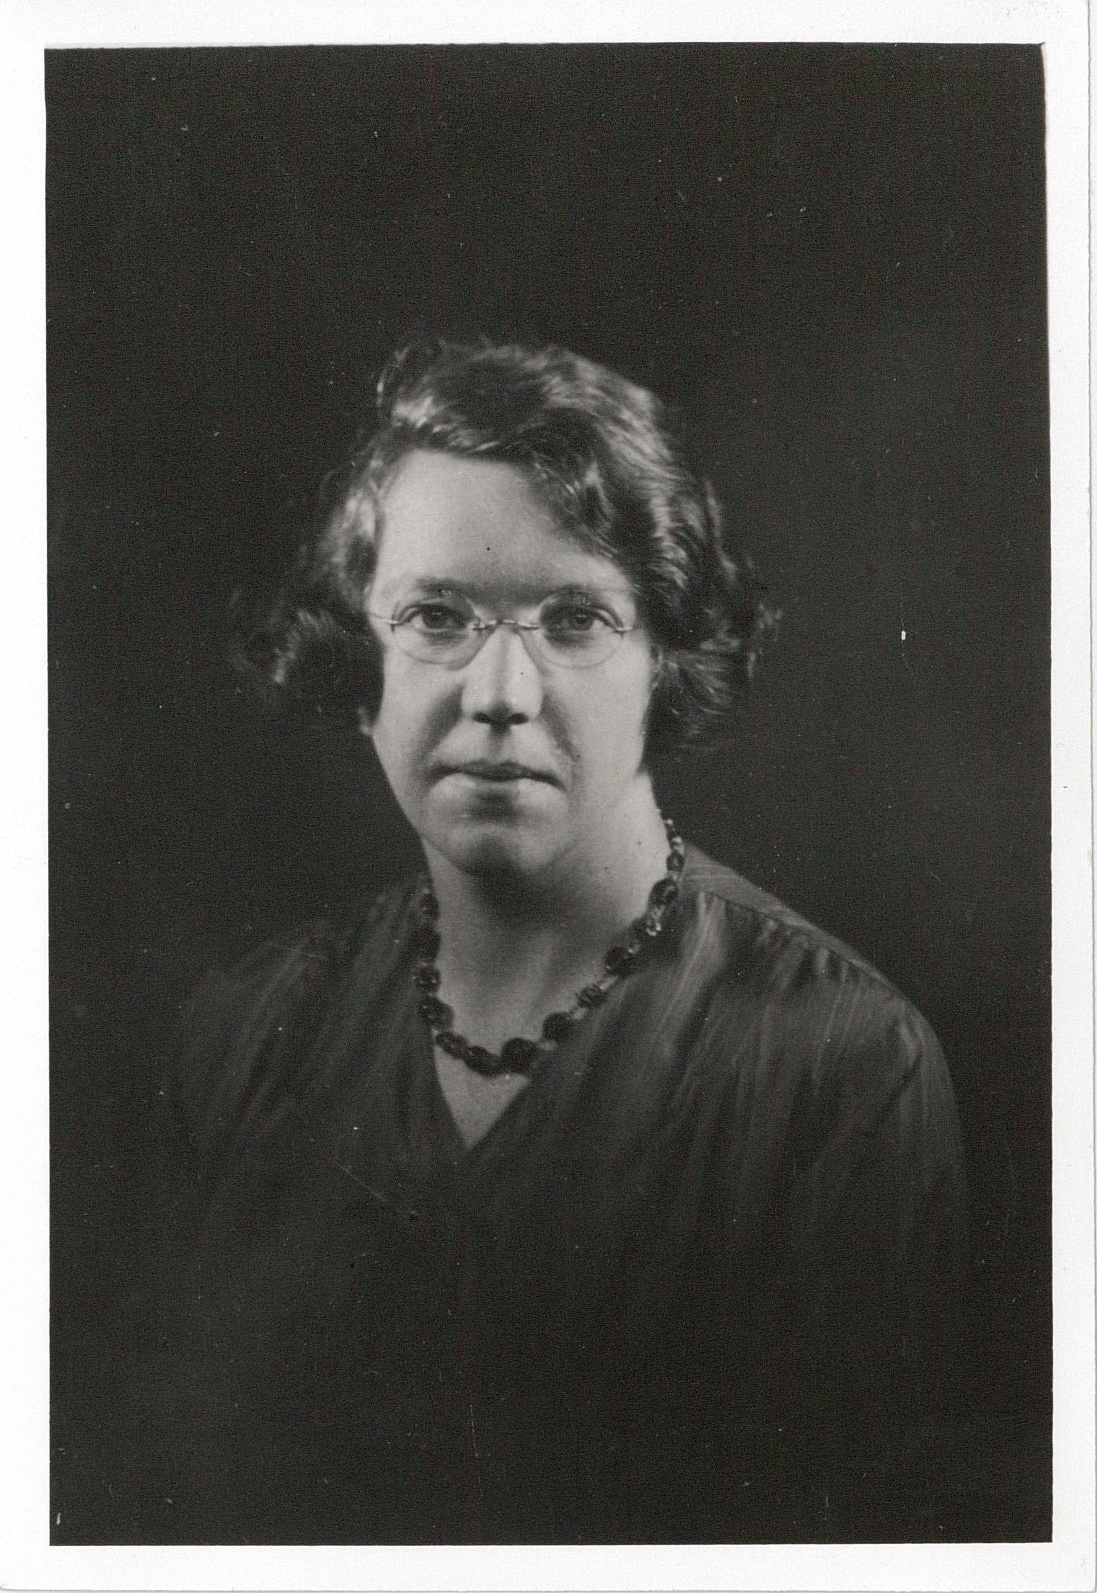 Jane Haining, the Scottish missionary who was murdered by the Nazis after caring for Jewish schoolgirls in Budapest 